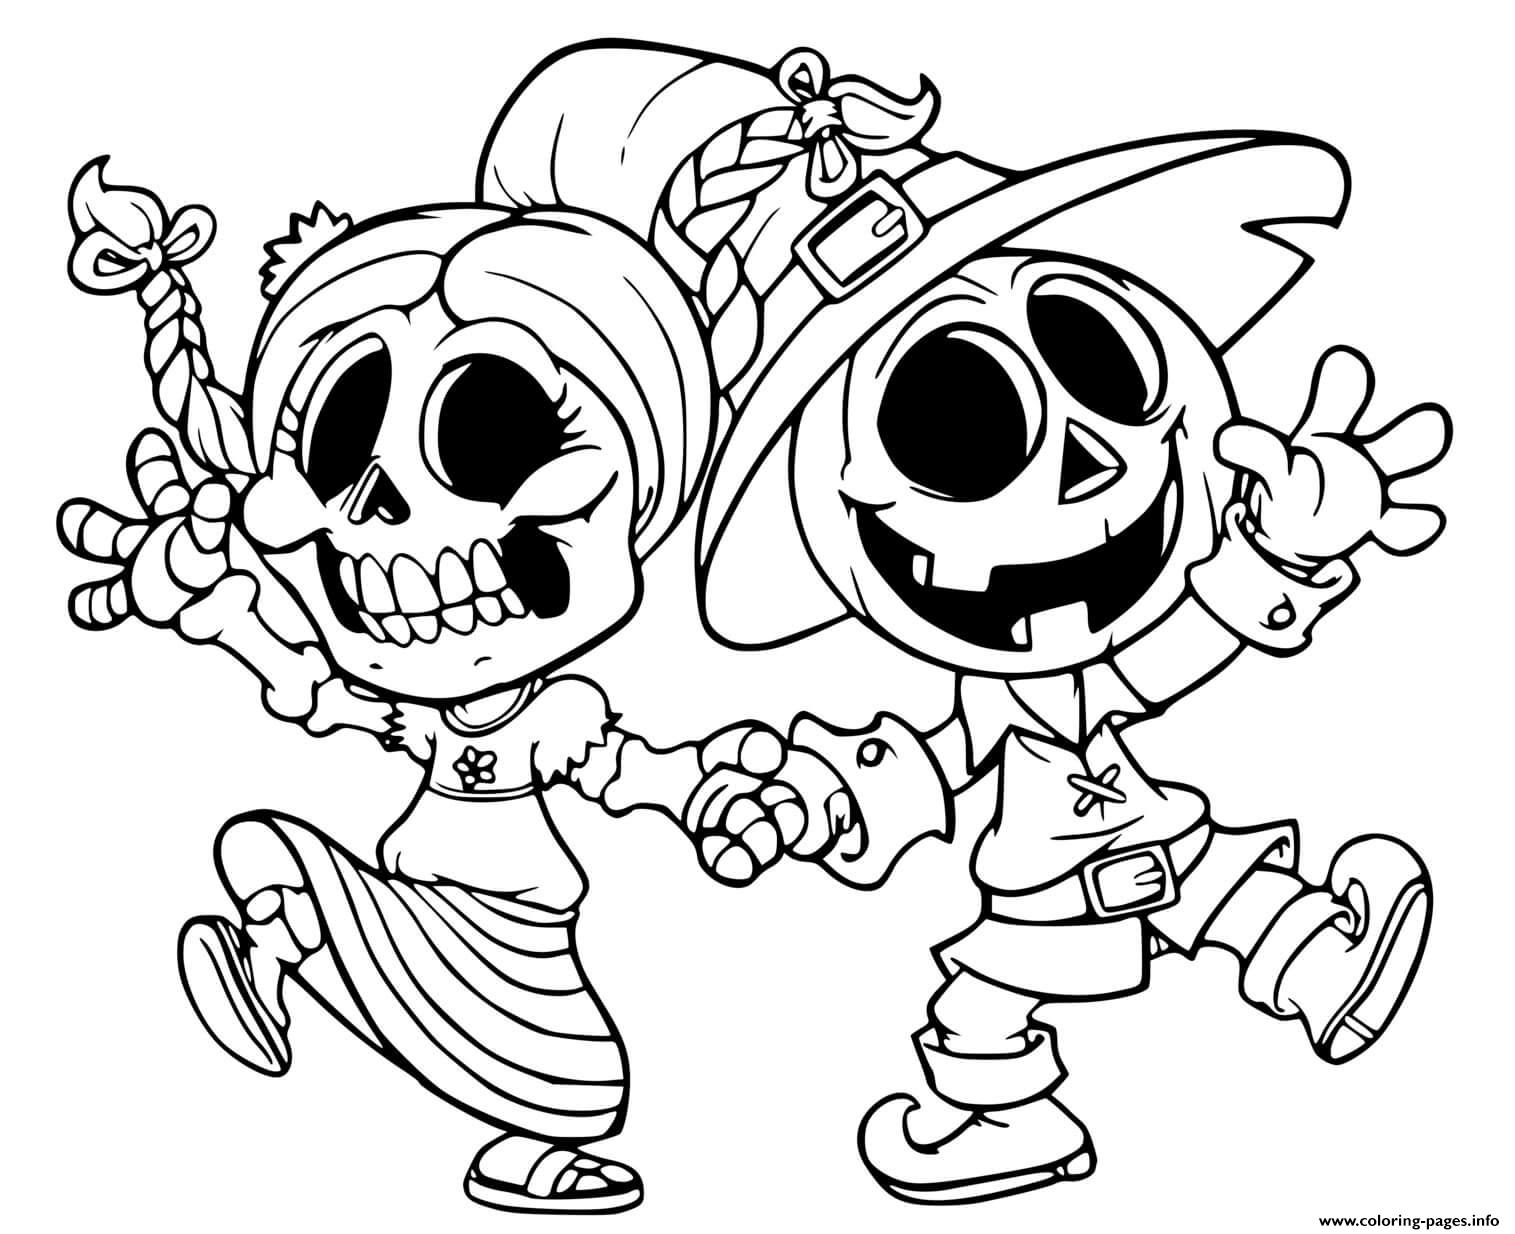 Cute Skeletons Couple coloring